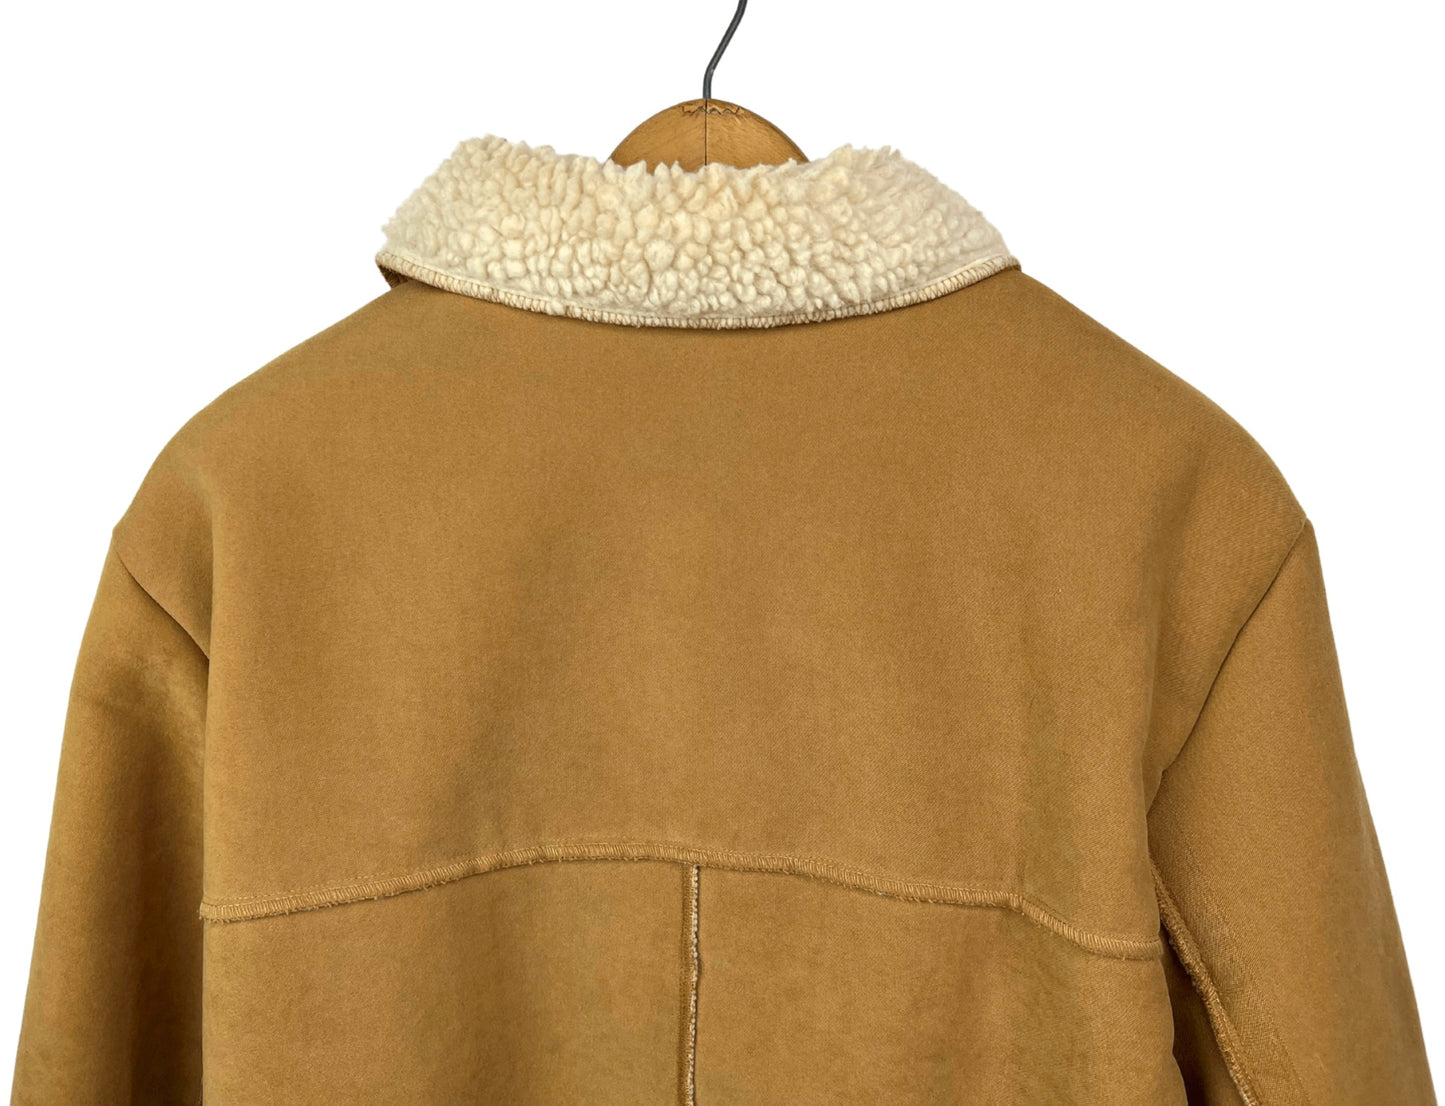 90’s Faux Suede Shearling Jacket Size X-Large